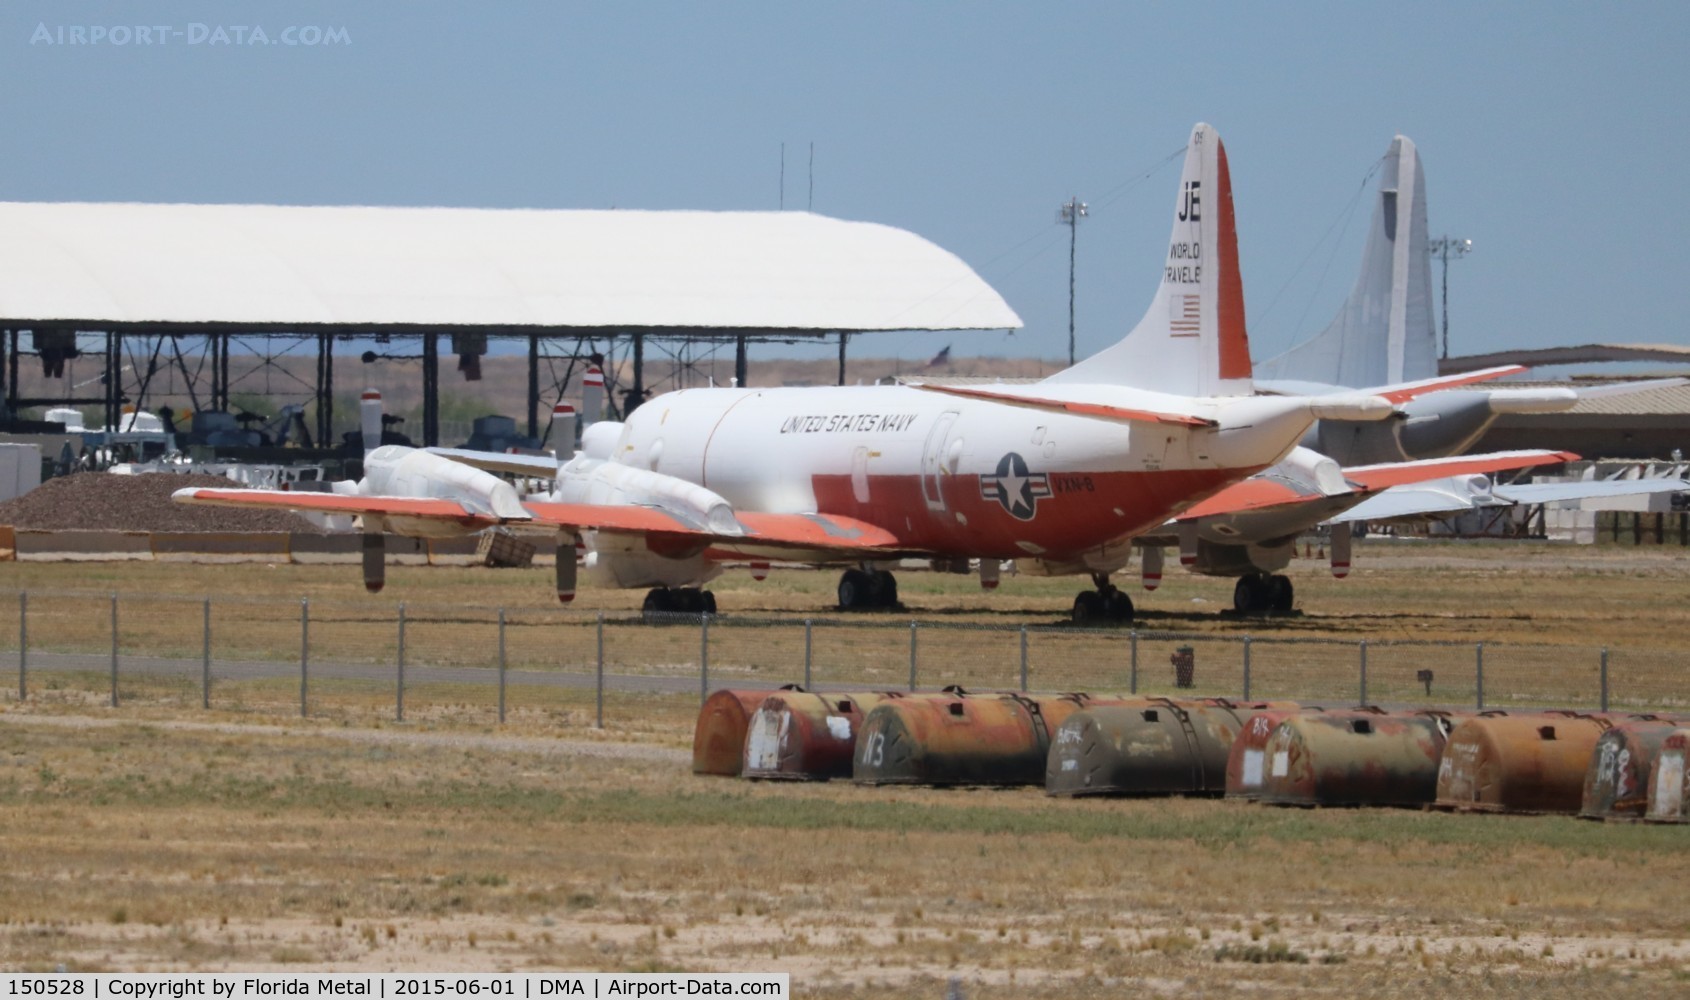 150528, Lockheed UP-3A Orion C/N 185-5054, UP-3A Orion